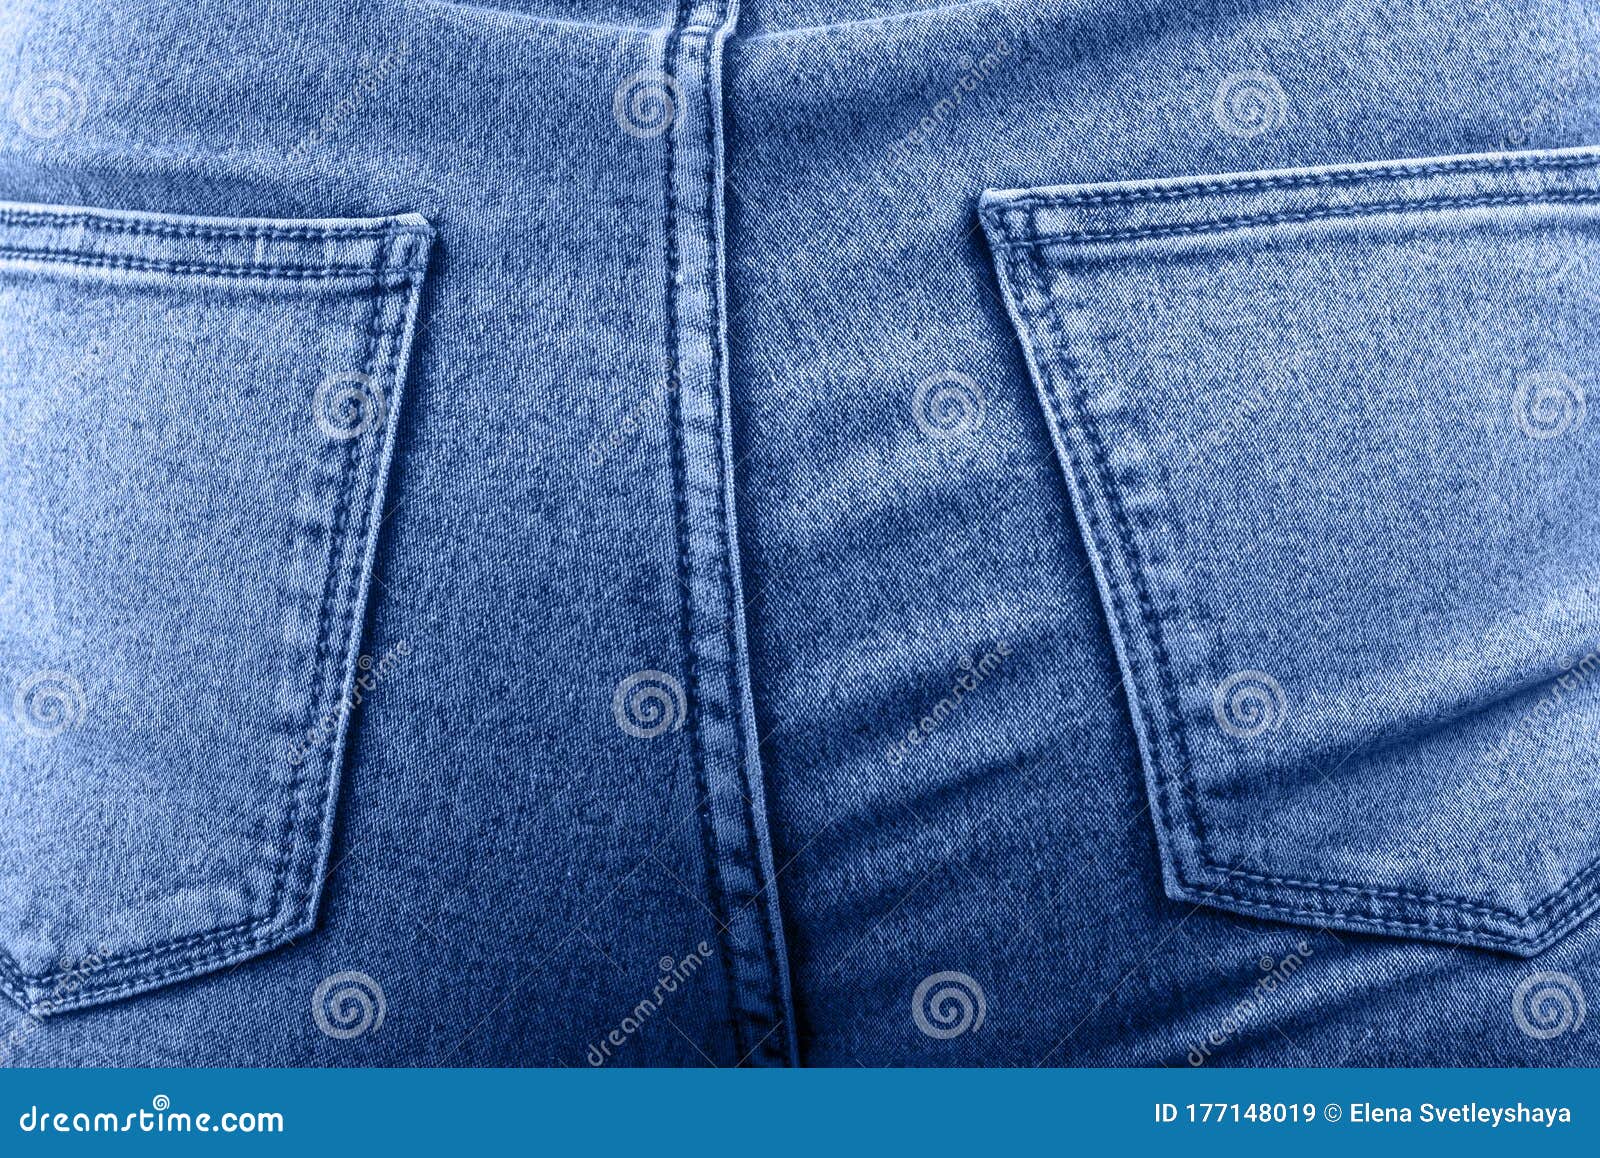 Female Hips in Jeans Close Up Stock Image - Image of denim, figure ...